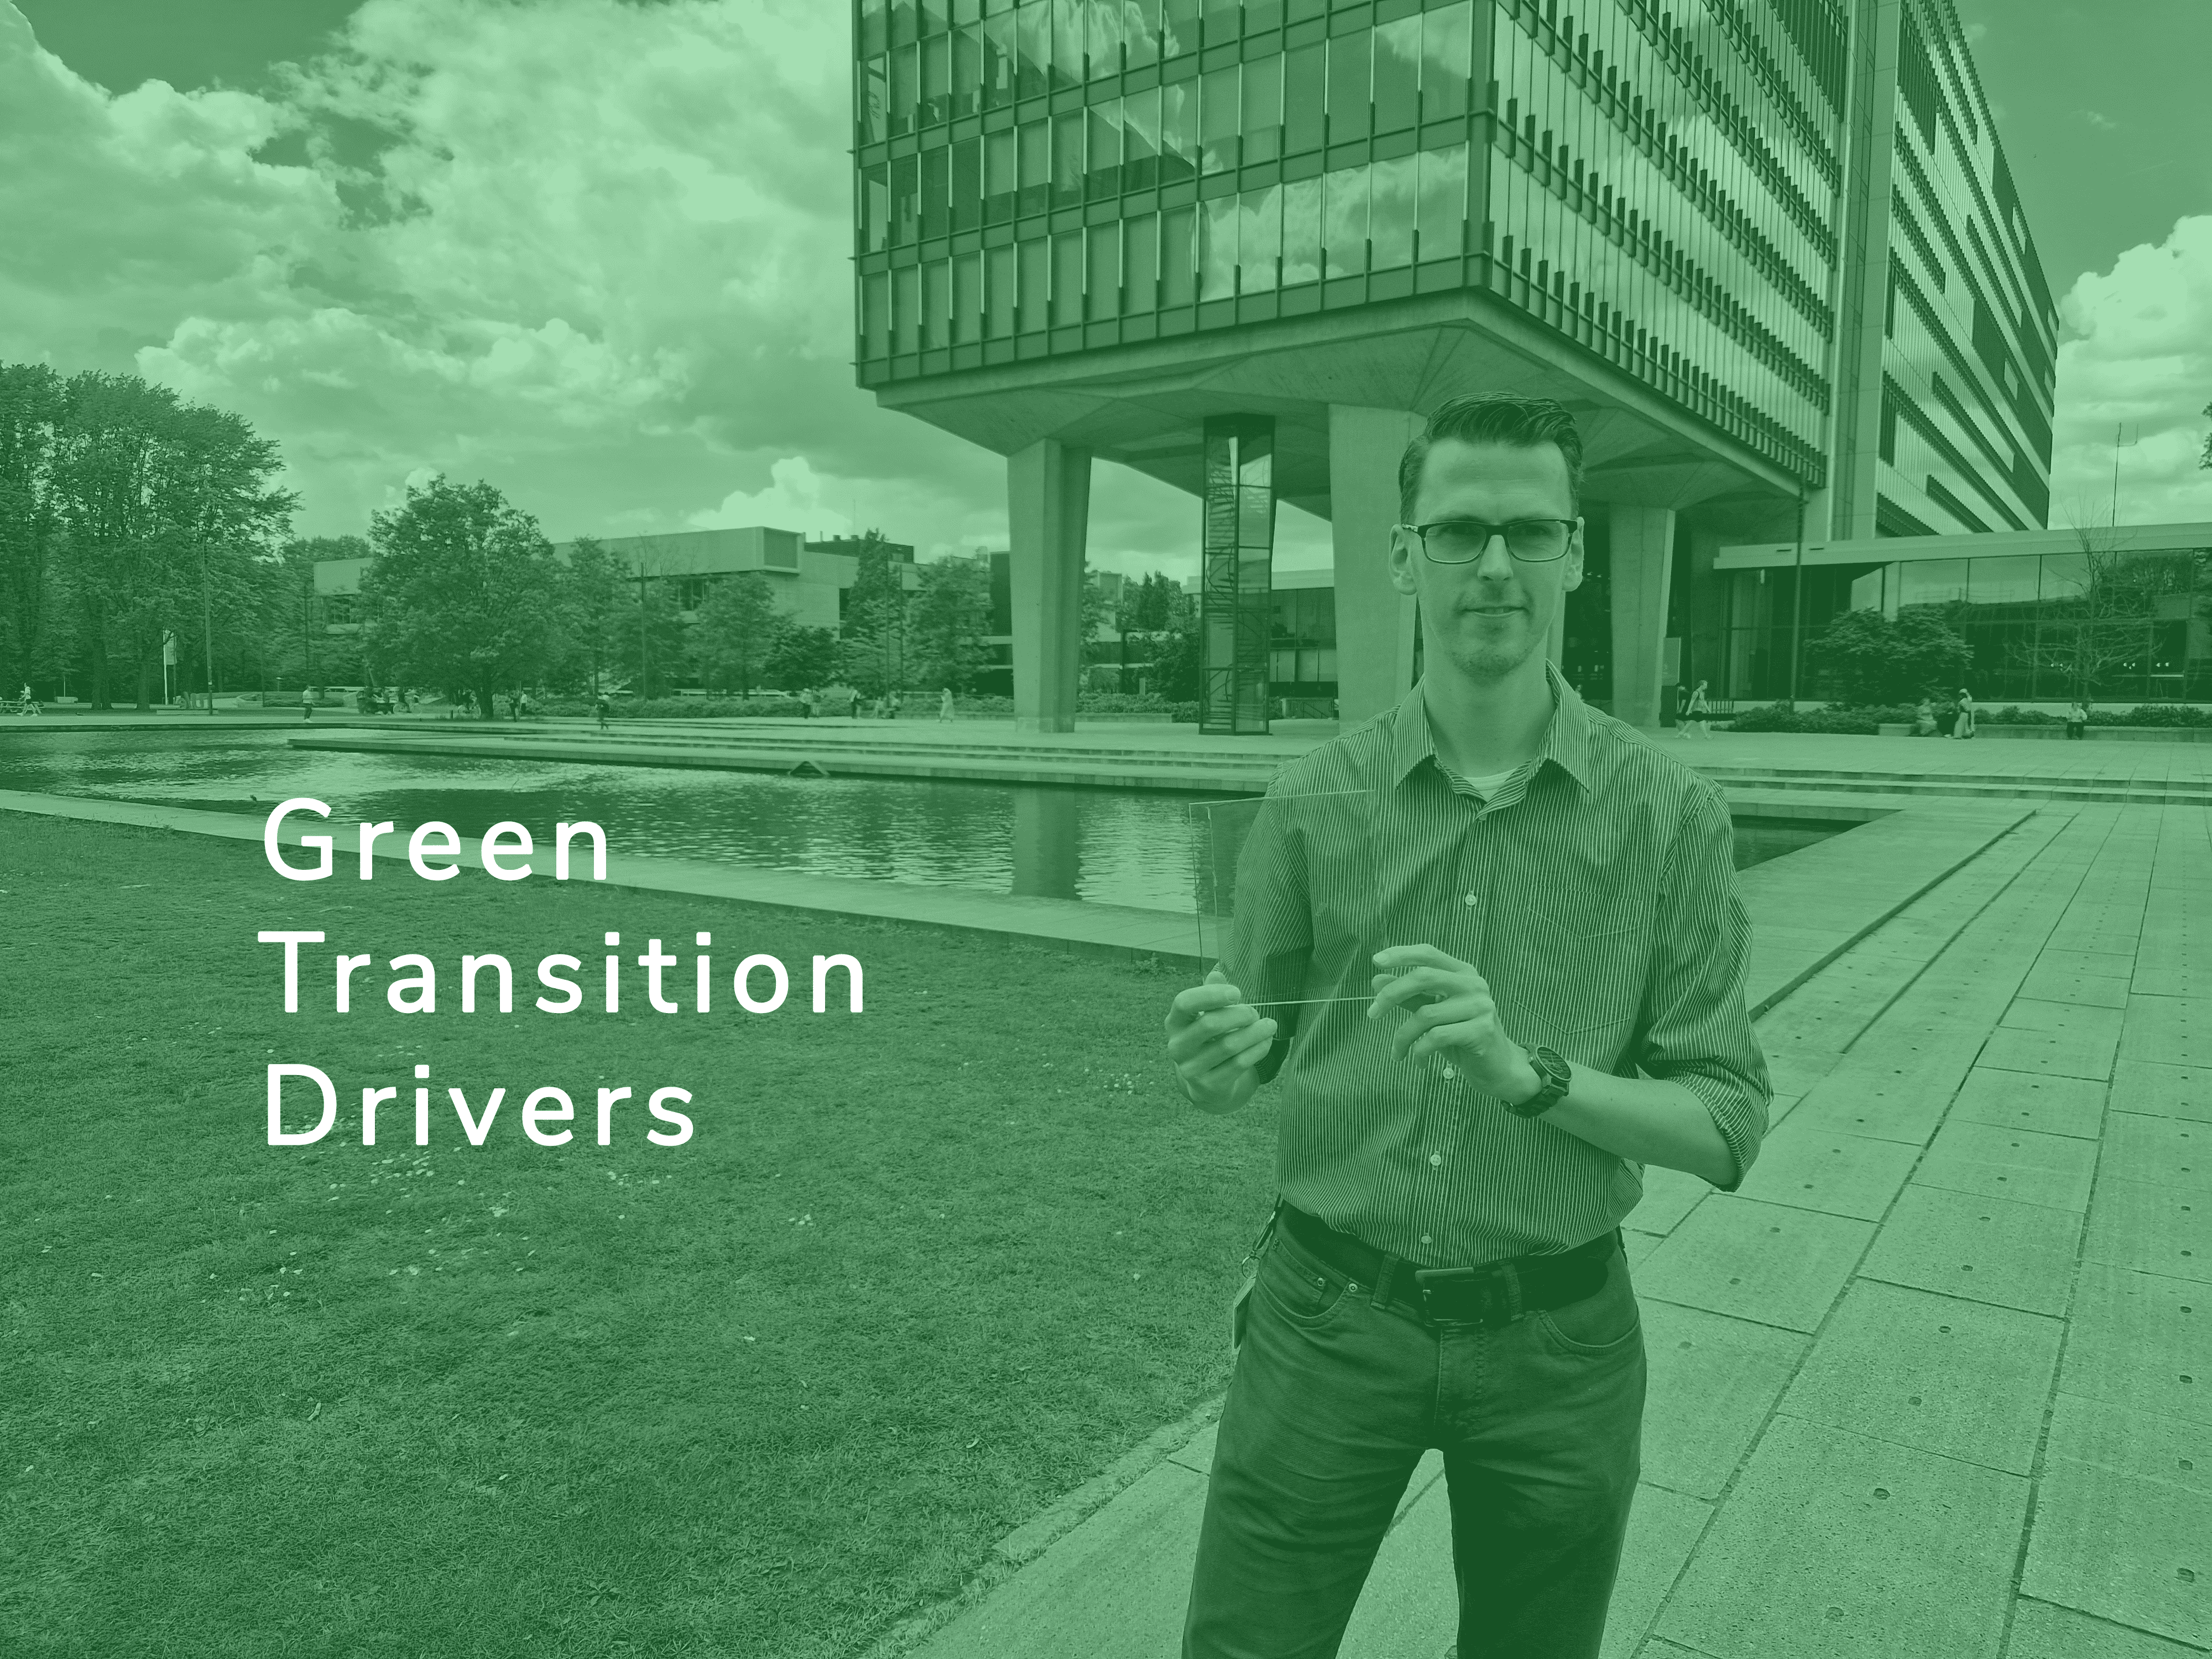 Controlling light to boost energy efficiency, so Stijn Kragt is giving an impulse to the green transition